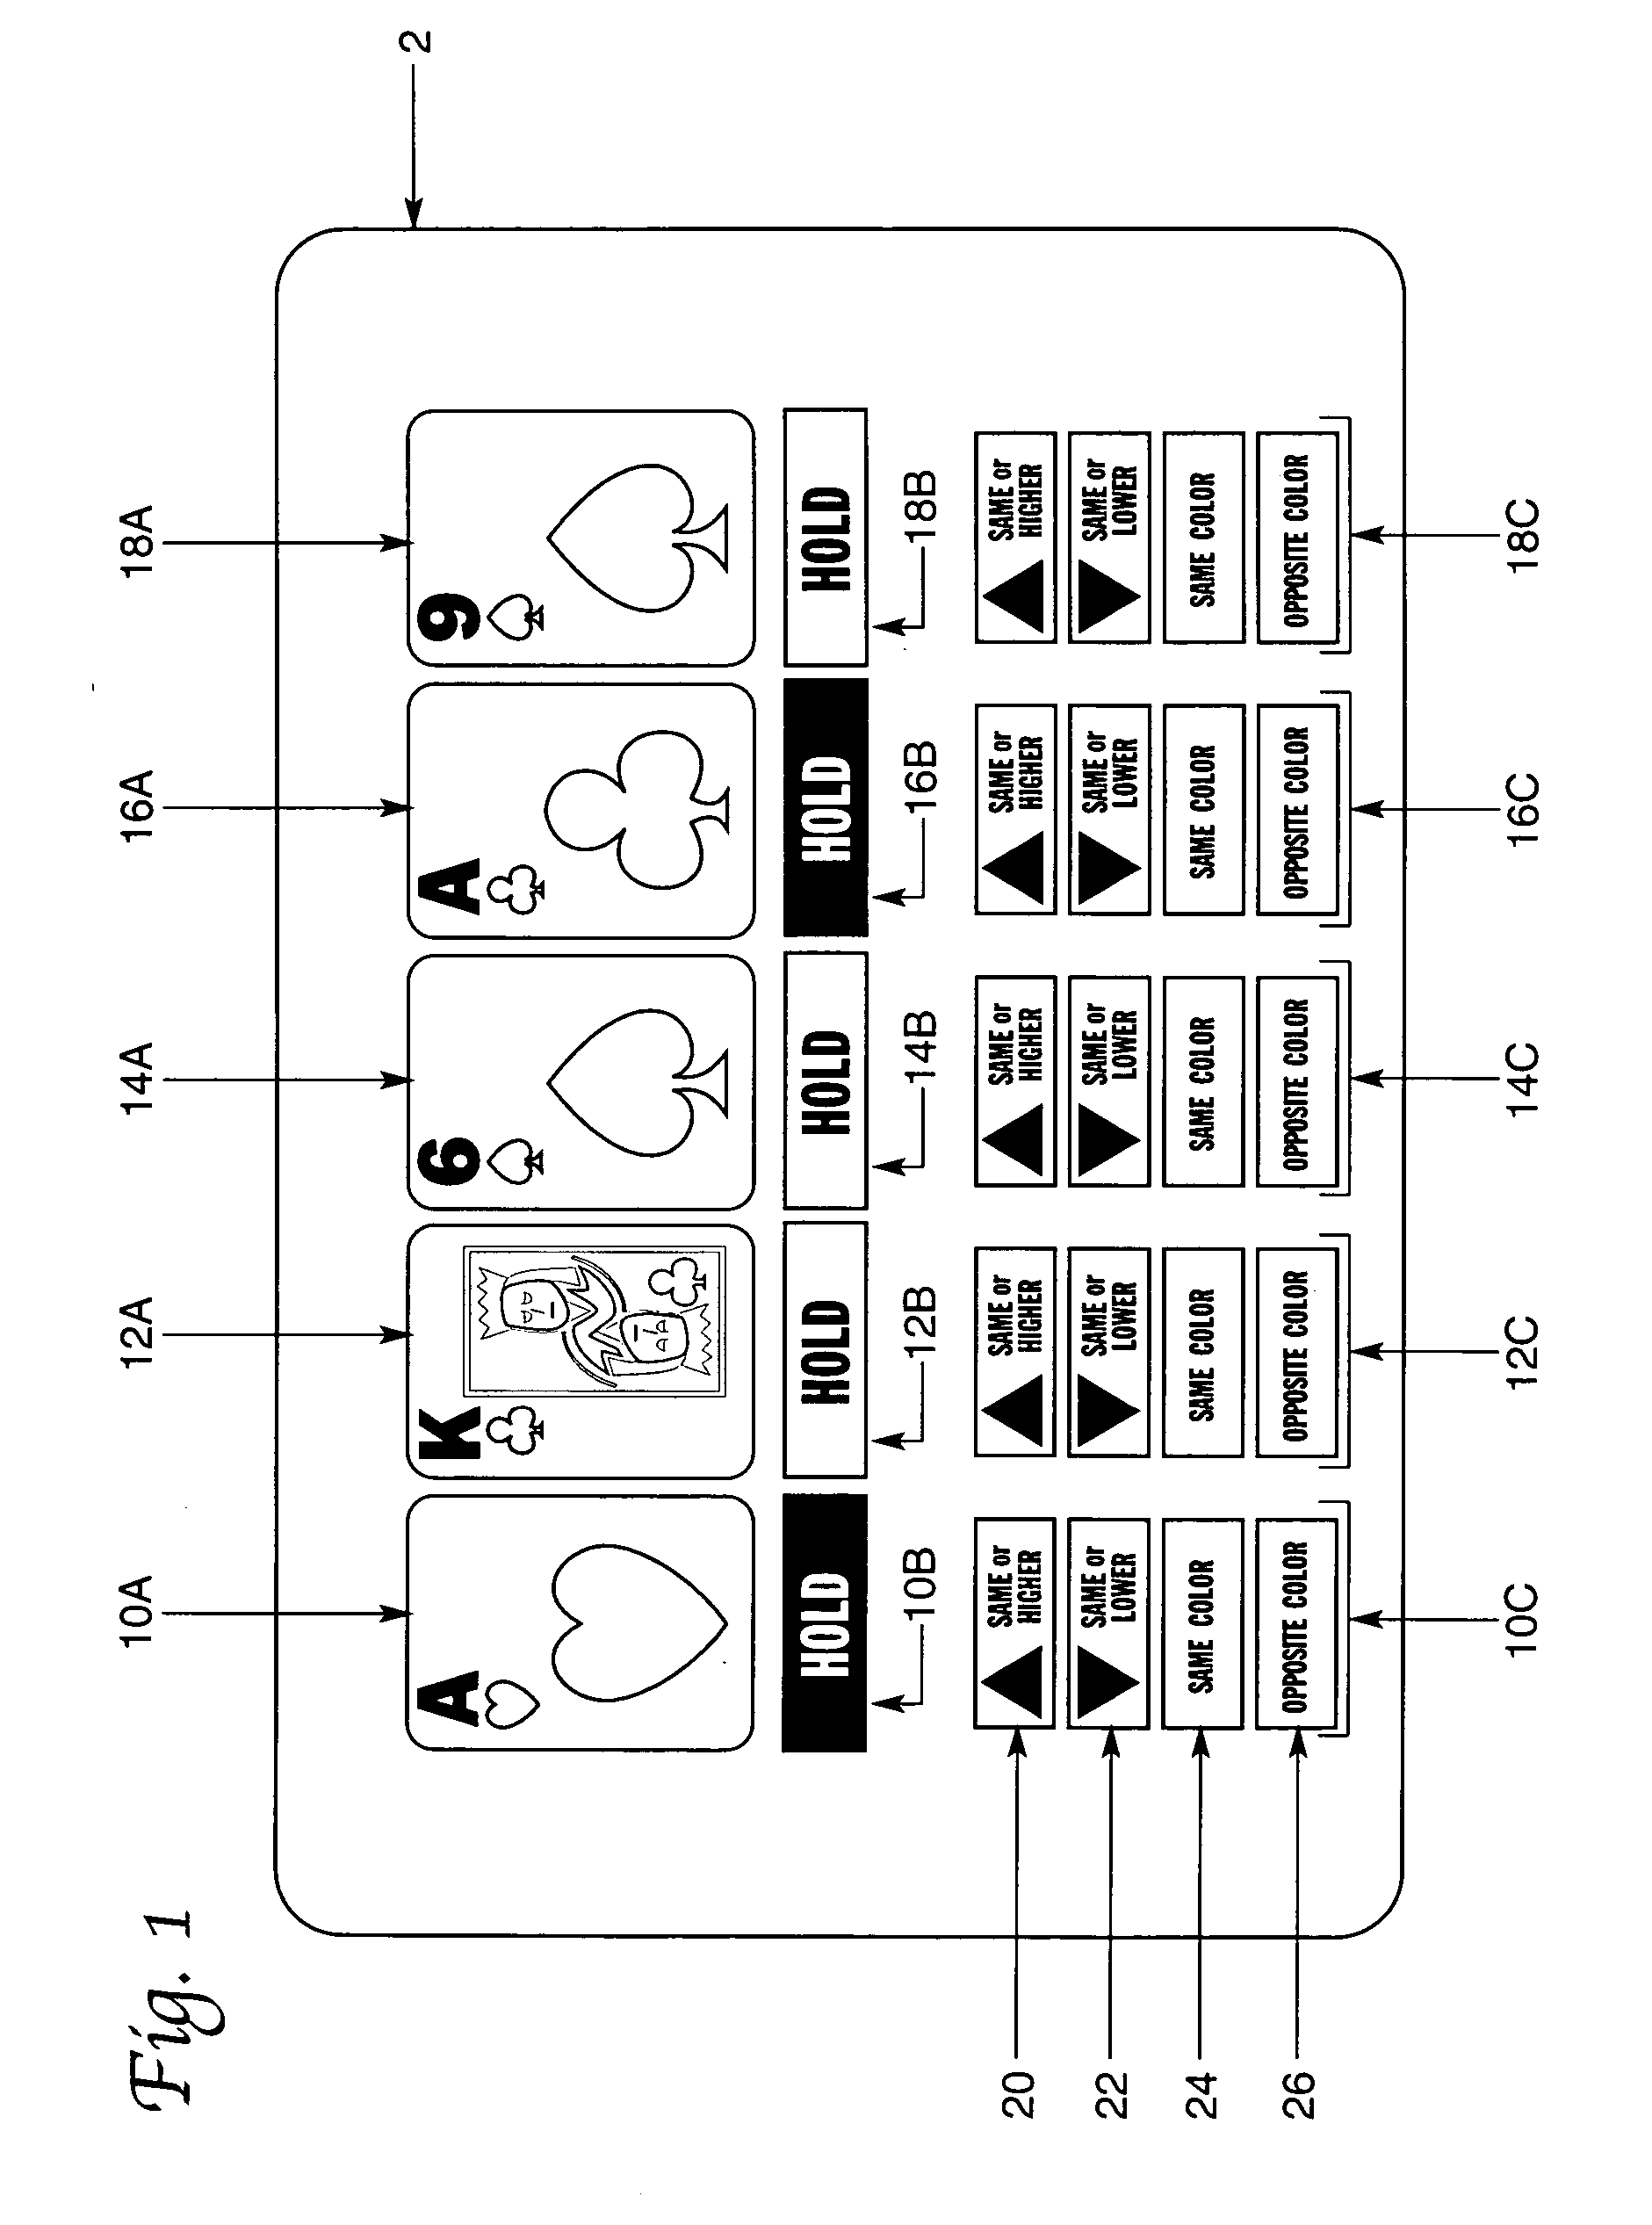 Replacement symbol selection in a method and apparatus for symbol play